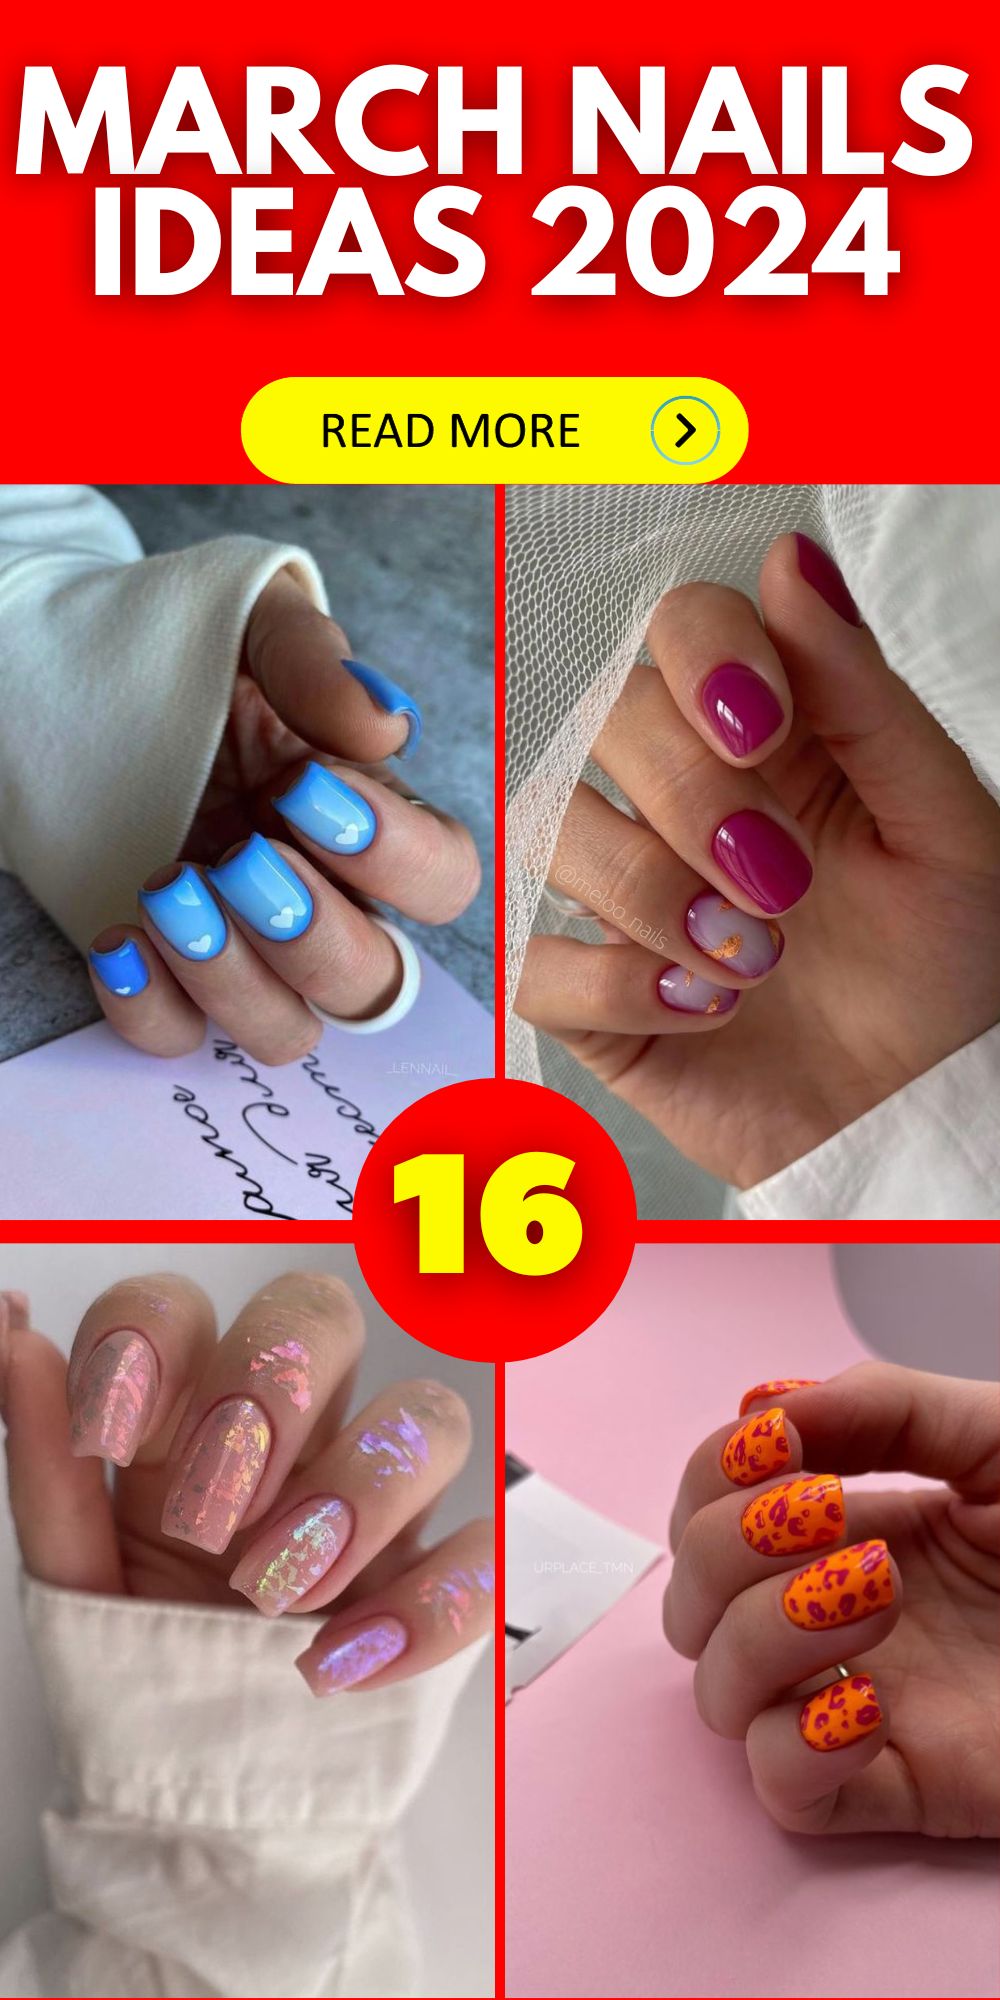 March Nails Ideas 2024 Embrace New Spring Trends with Cute, Simple Styles